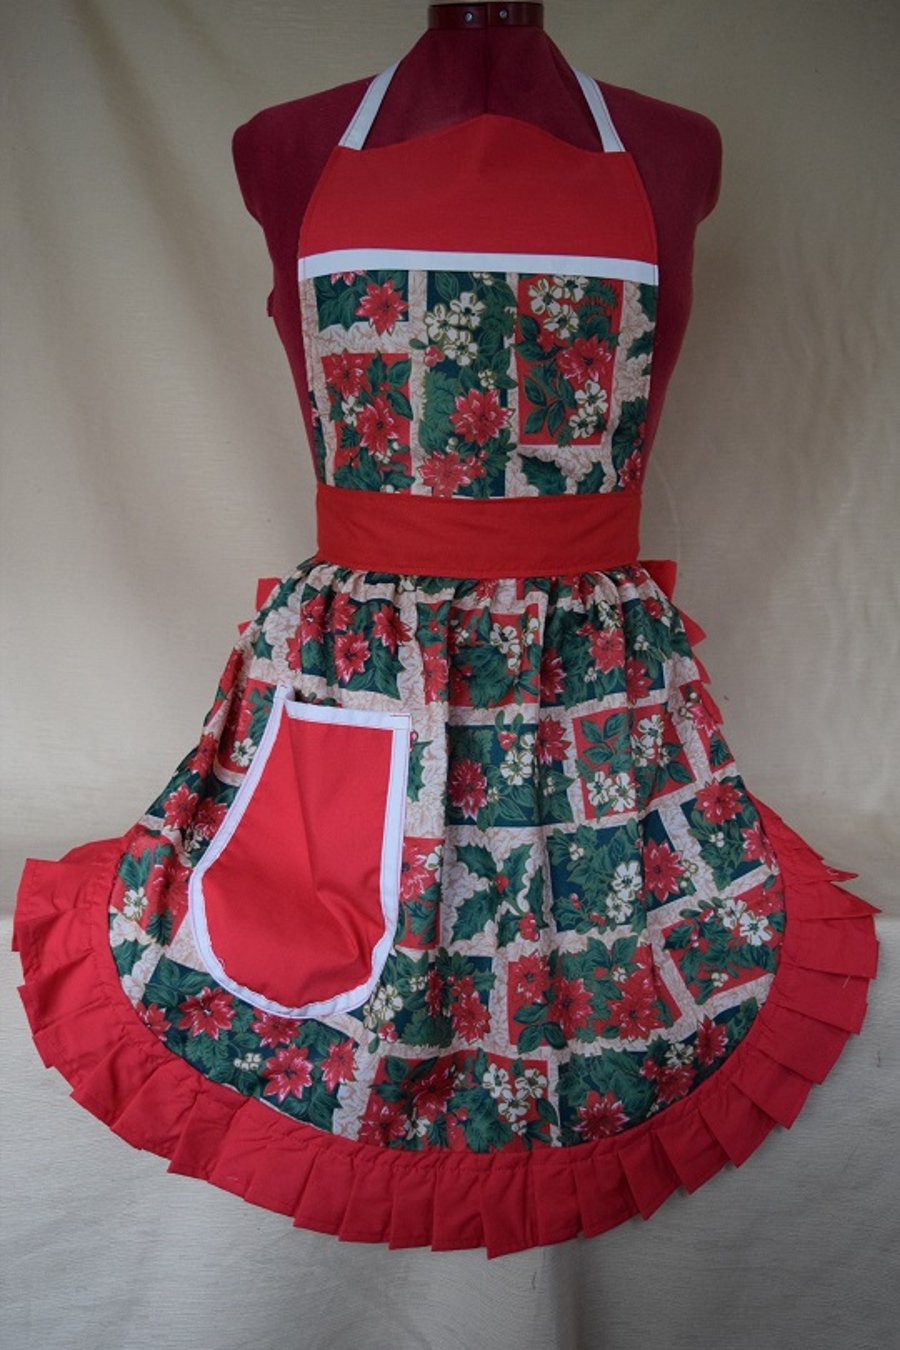 Vintage 50s Style Full Apron Pinny - Christmas Holly & Poinsettia With Red Trim